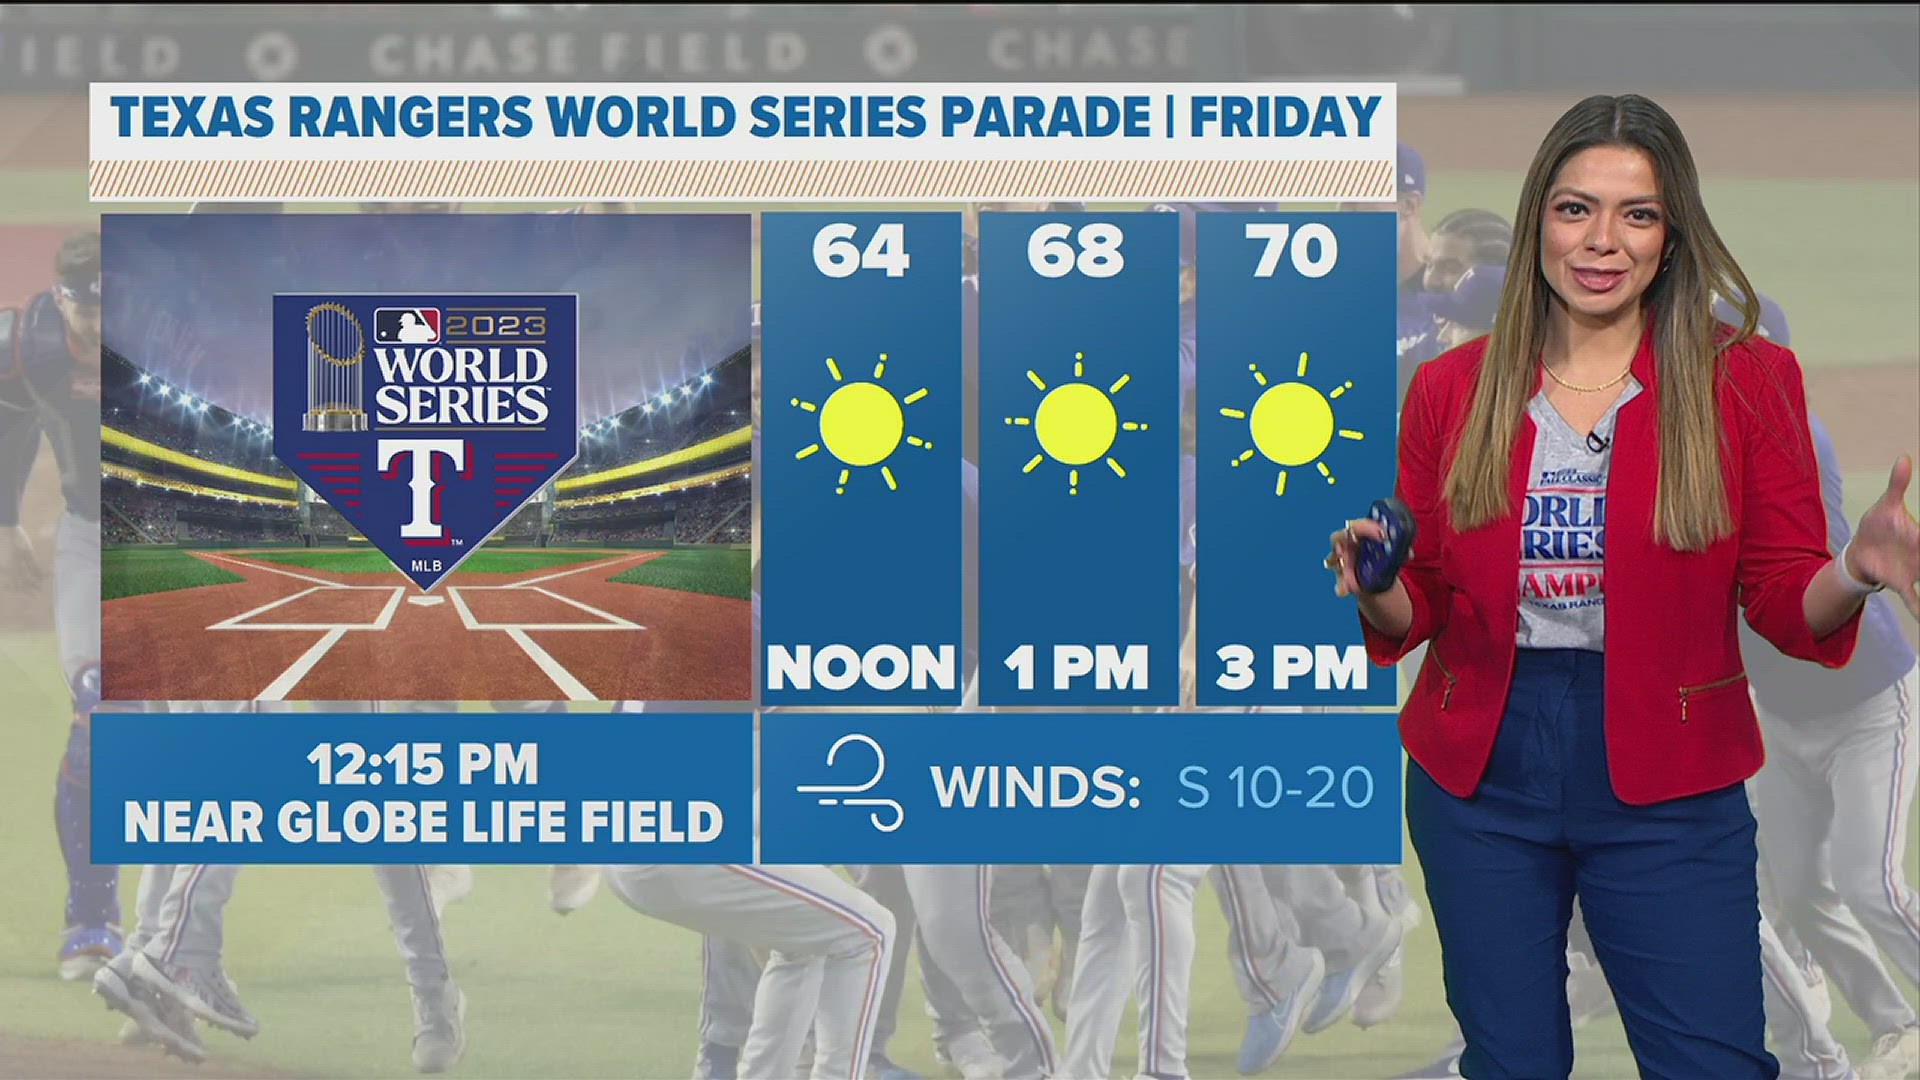 DFW Weather: The World Series Parade forecast is looking great! The rest of the weekend looks sunny and warm. Update with Meteorologist Mariel Ruiz.